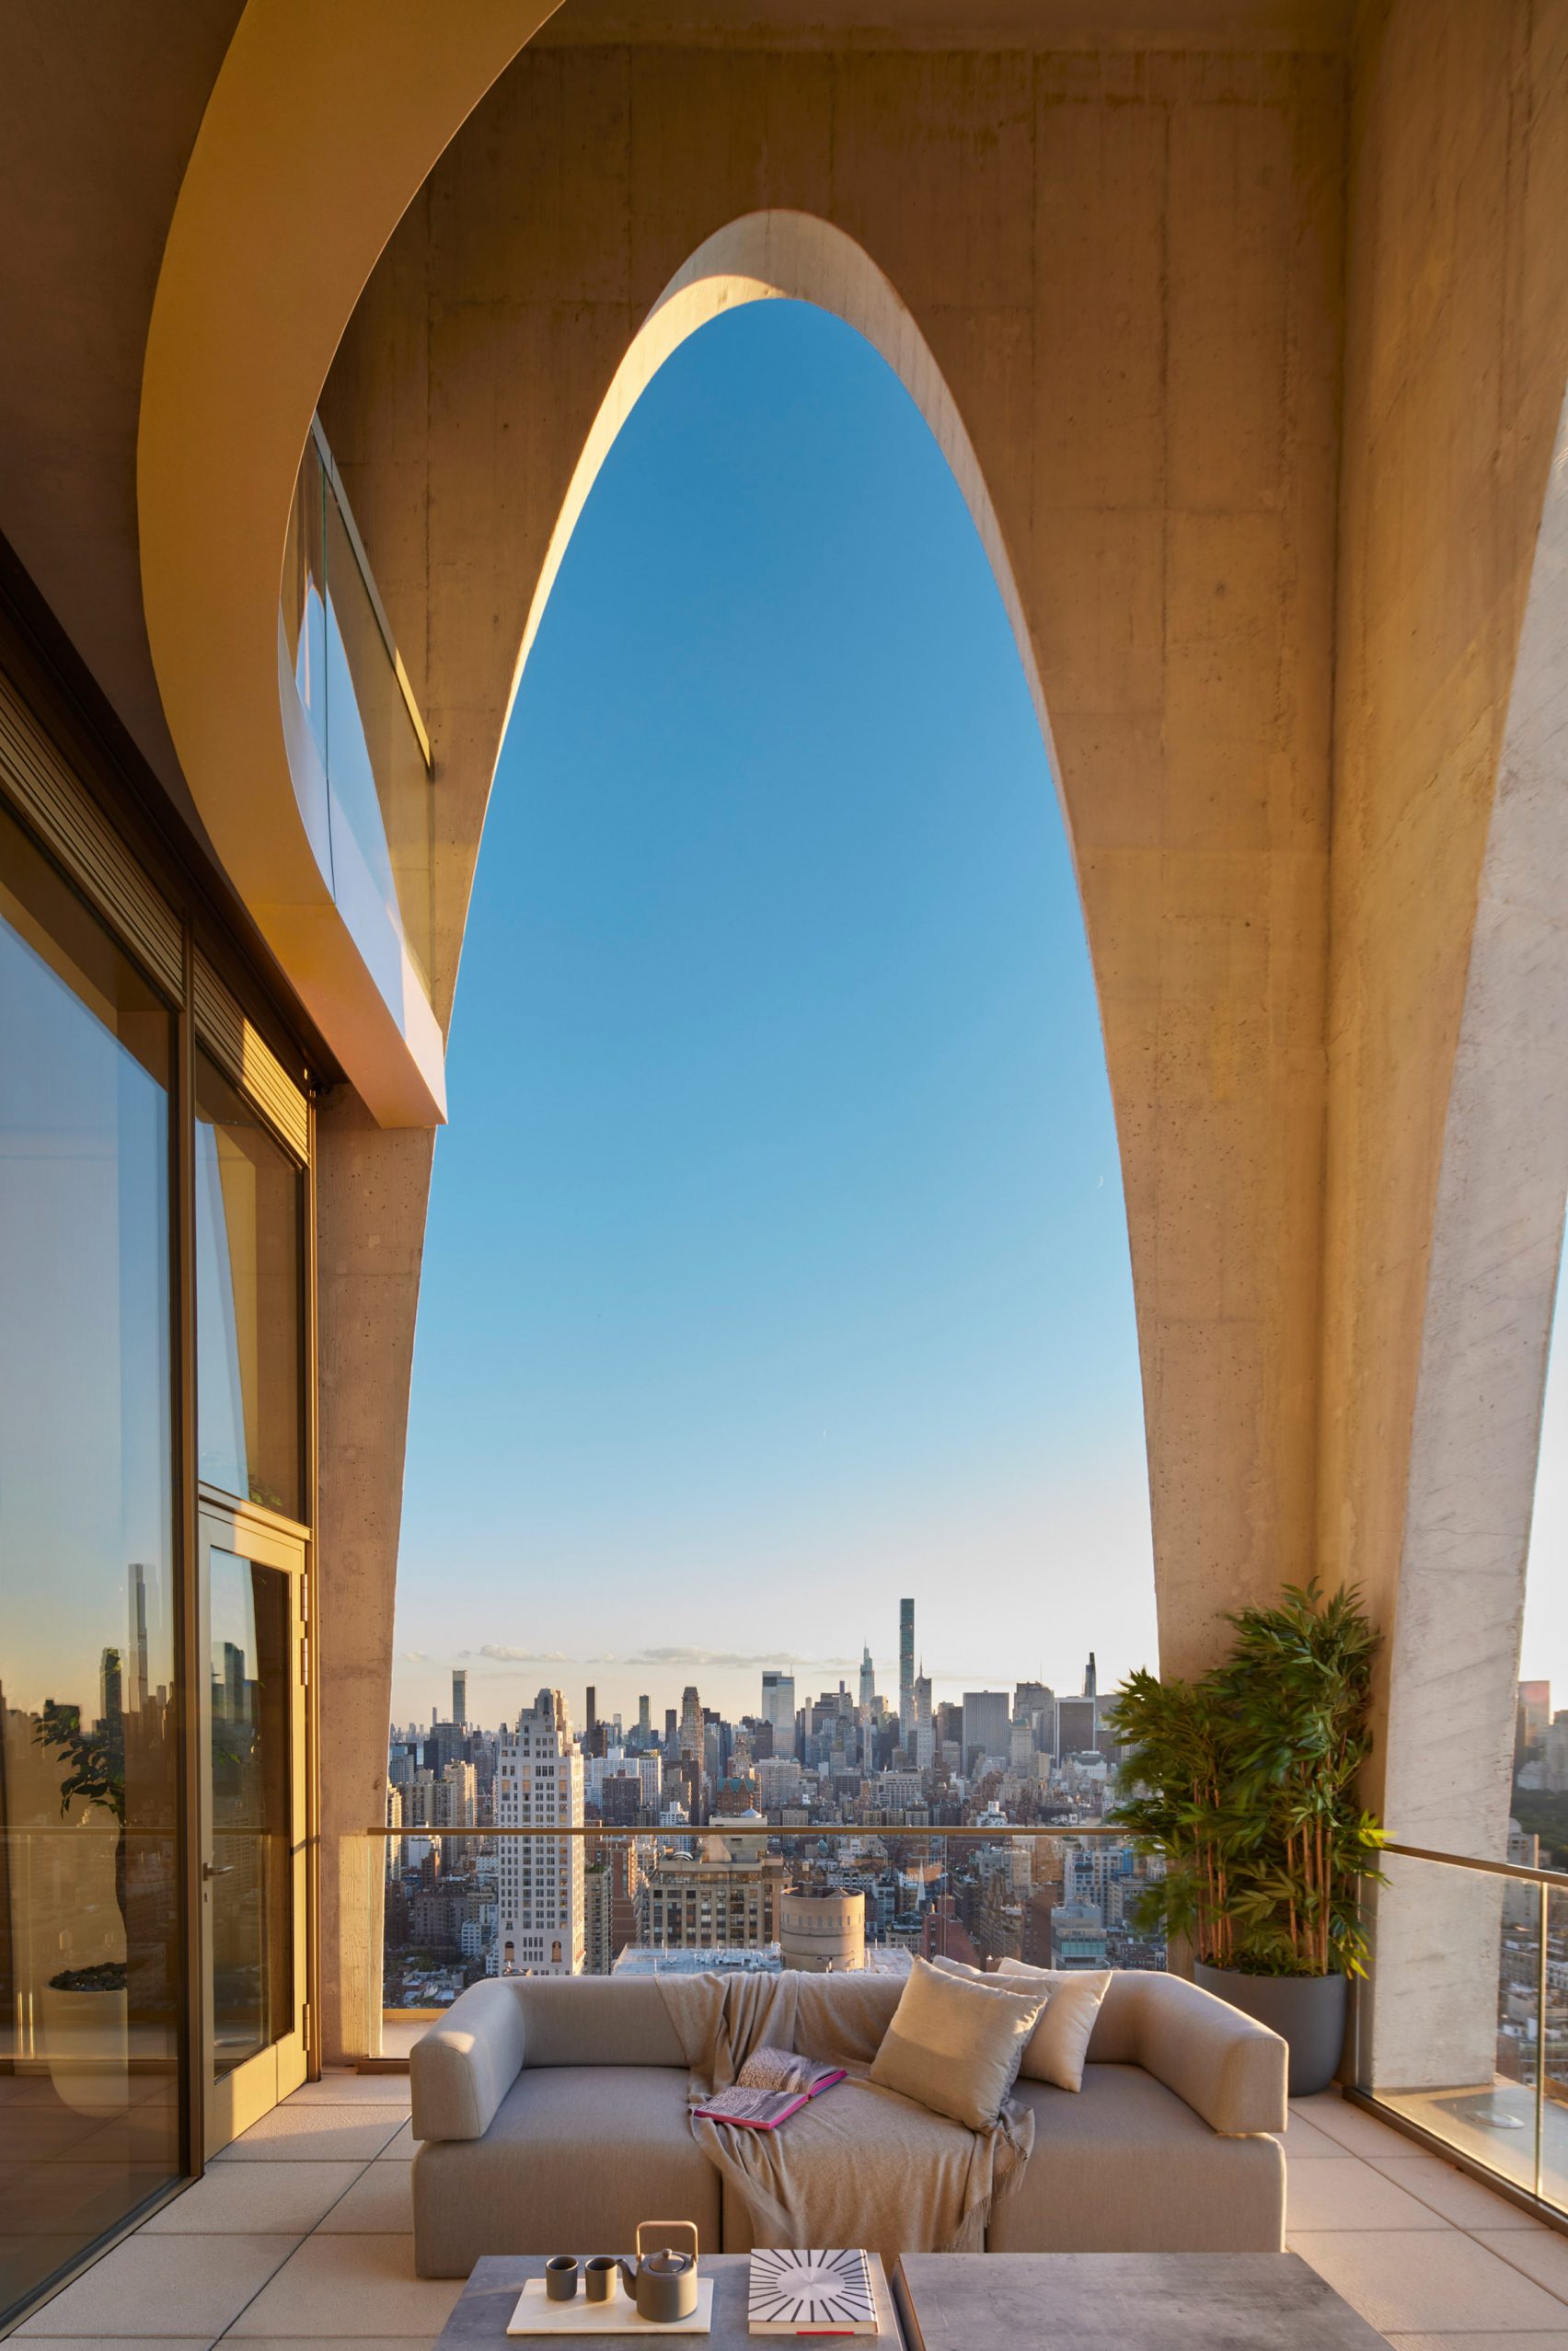 Huge arched opening with view of Manhattan